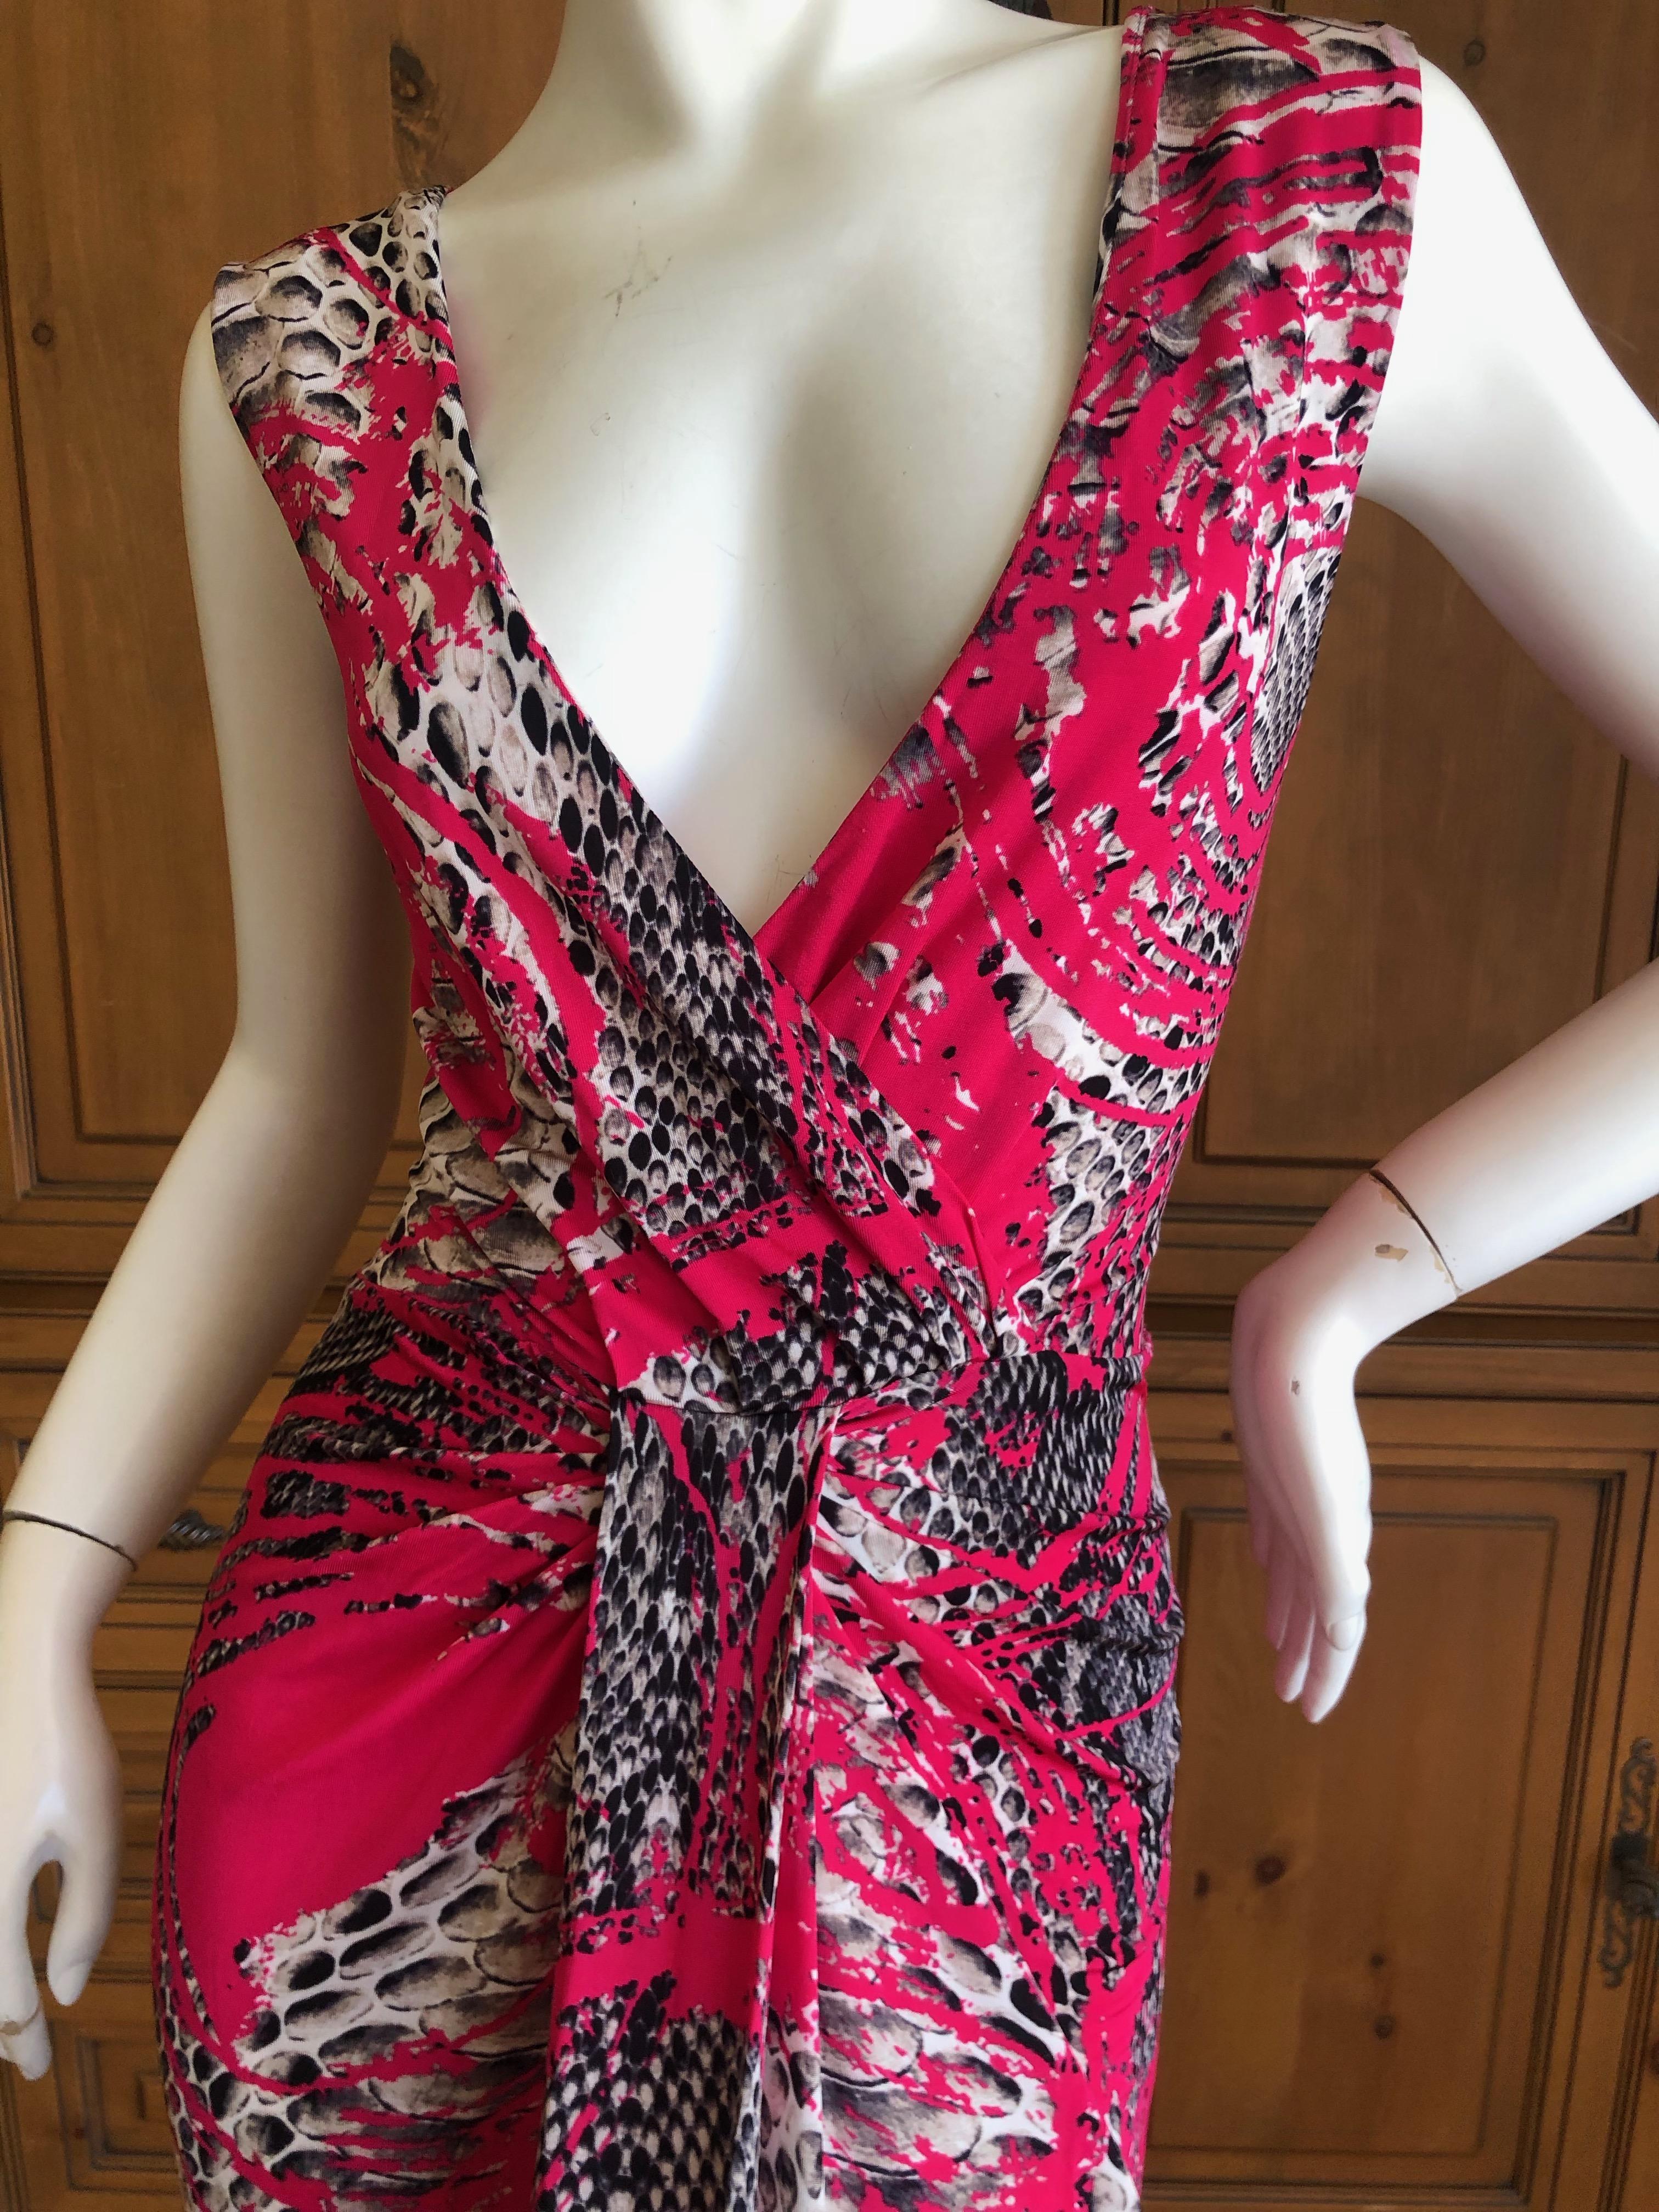 Roberto Cavalli Low Cut Zebra Pattern Evening Dress for Just Cavalli In Excellent Condition For Sale In Cloverdale, CA